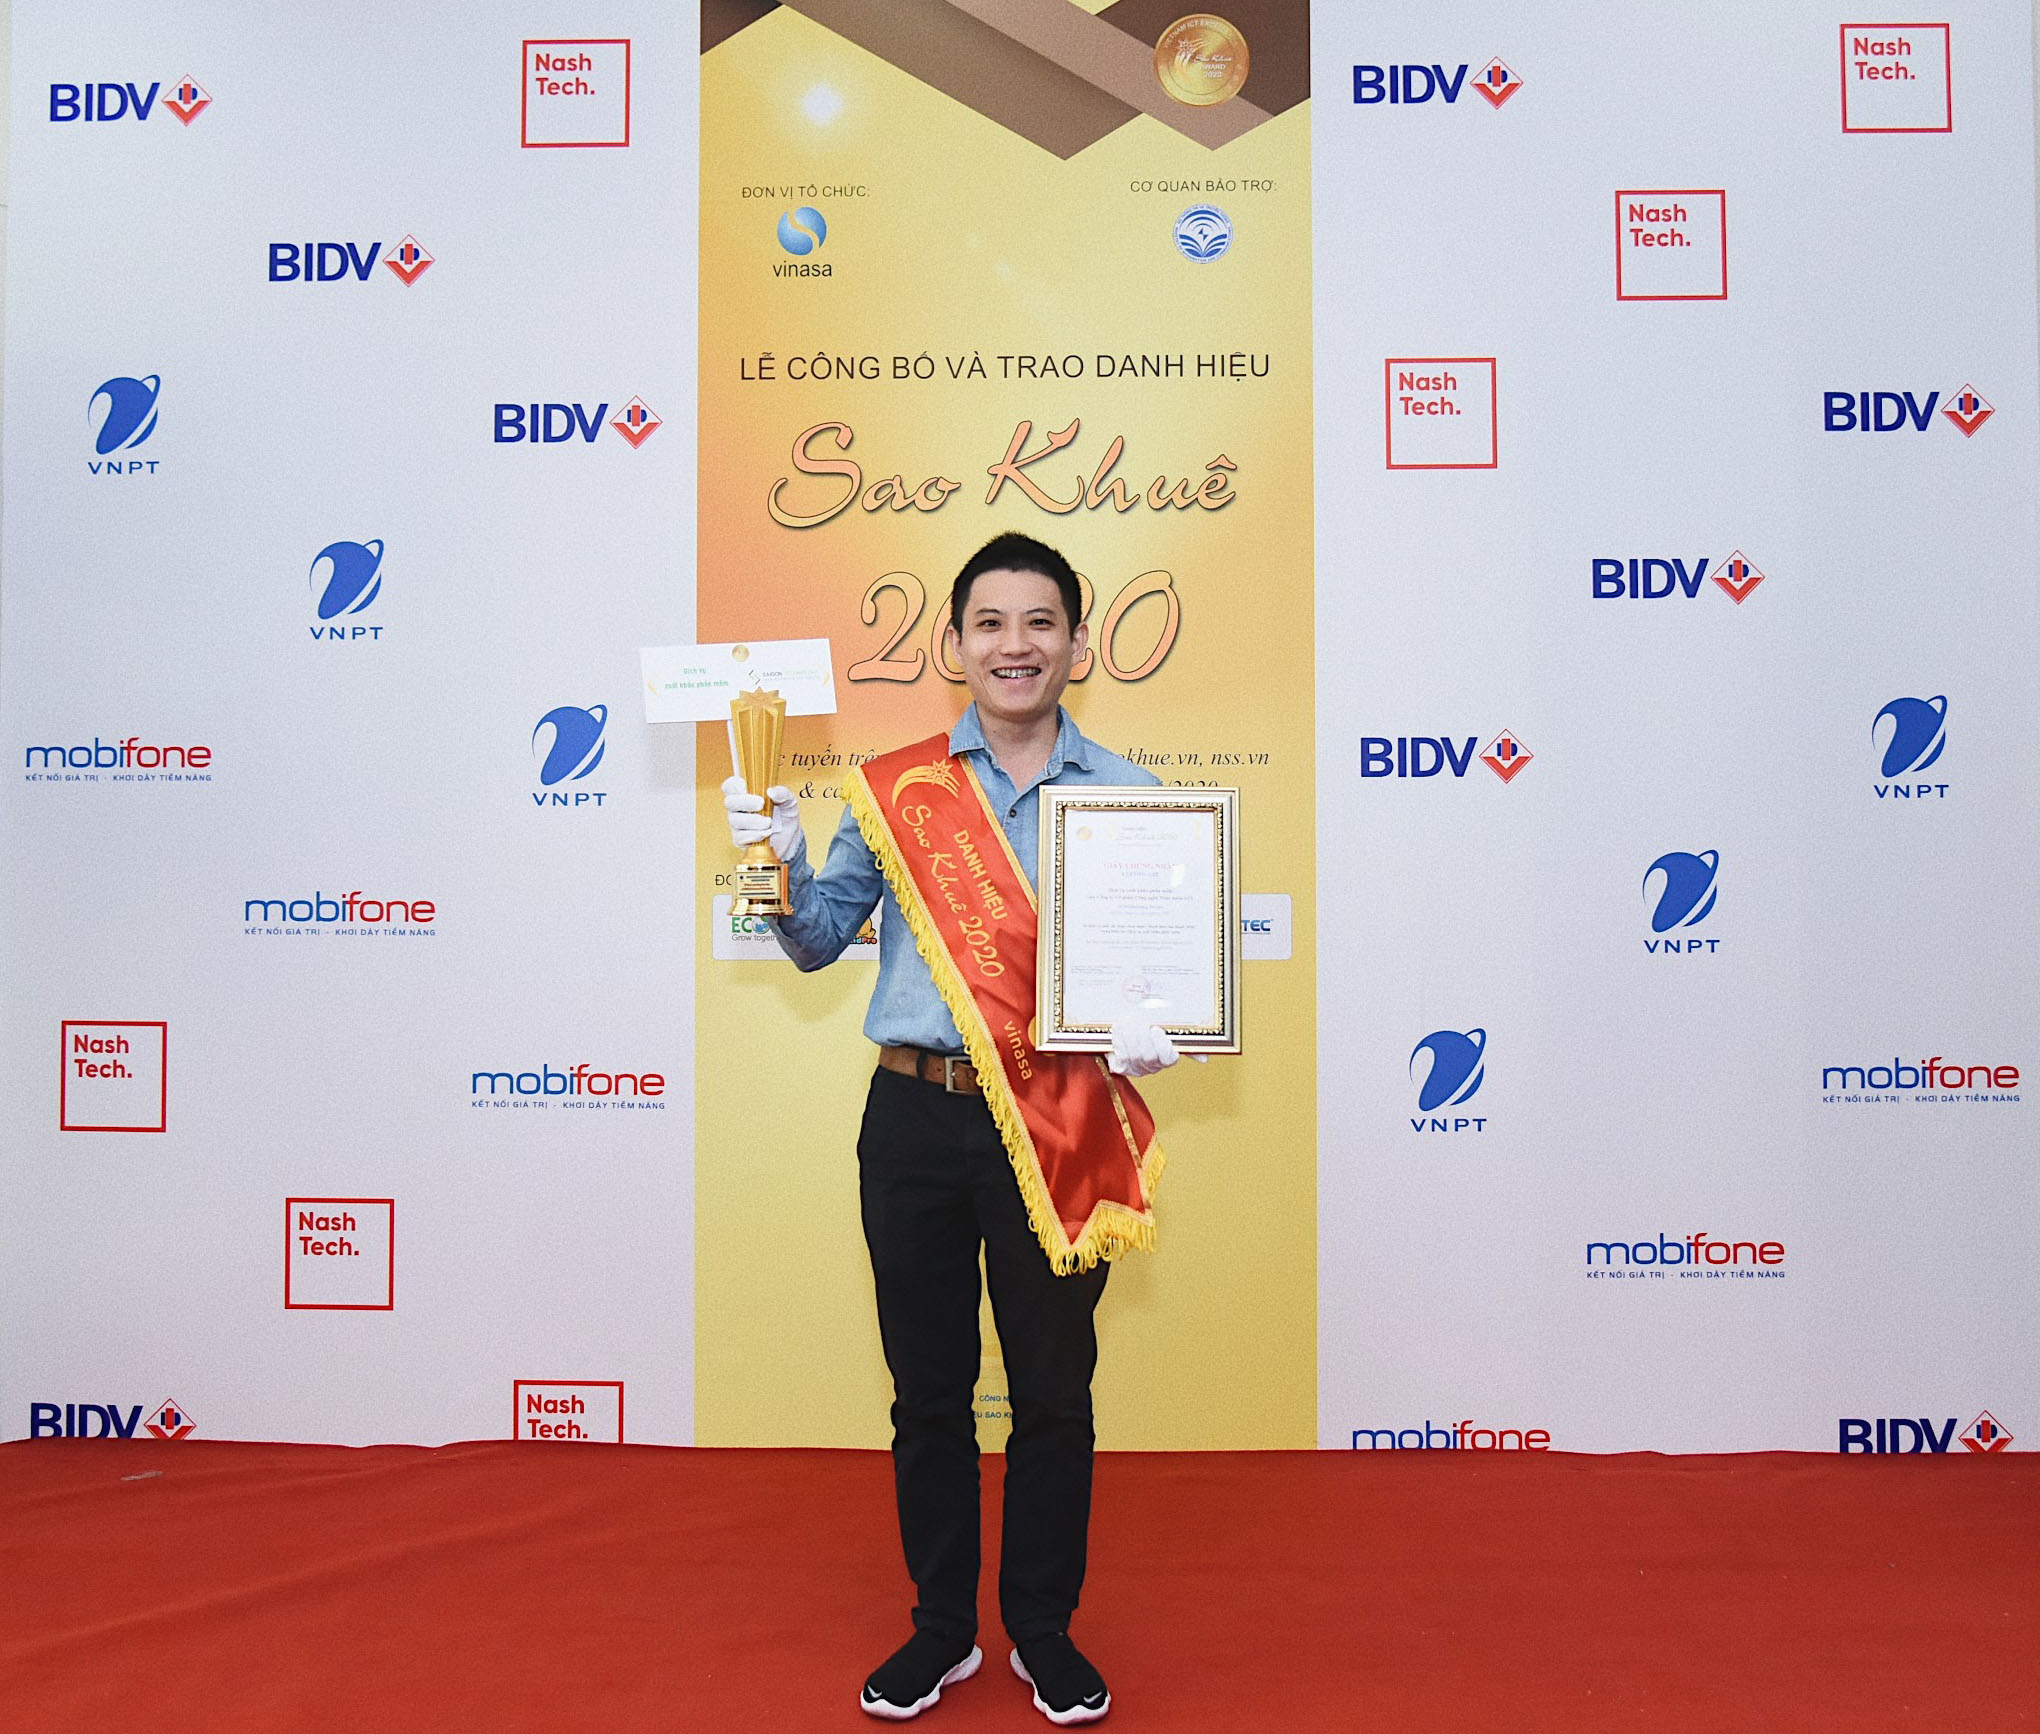 Sao Khue 2020  - Saigon Technology is awarded the Certificate of Excellence by The Vietnam Software Association